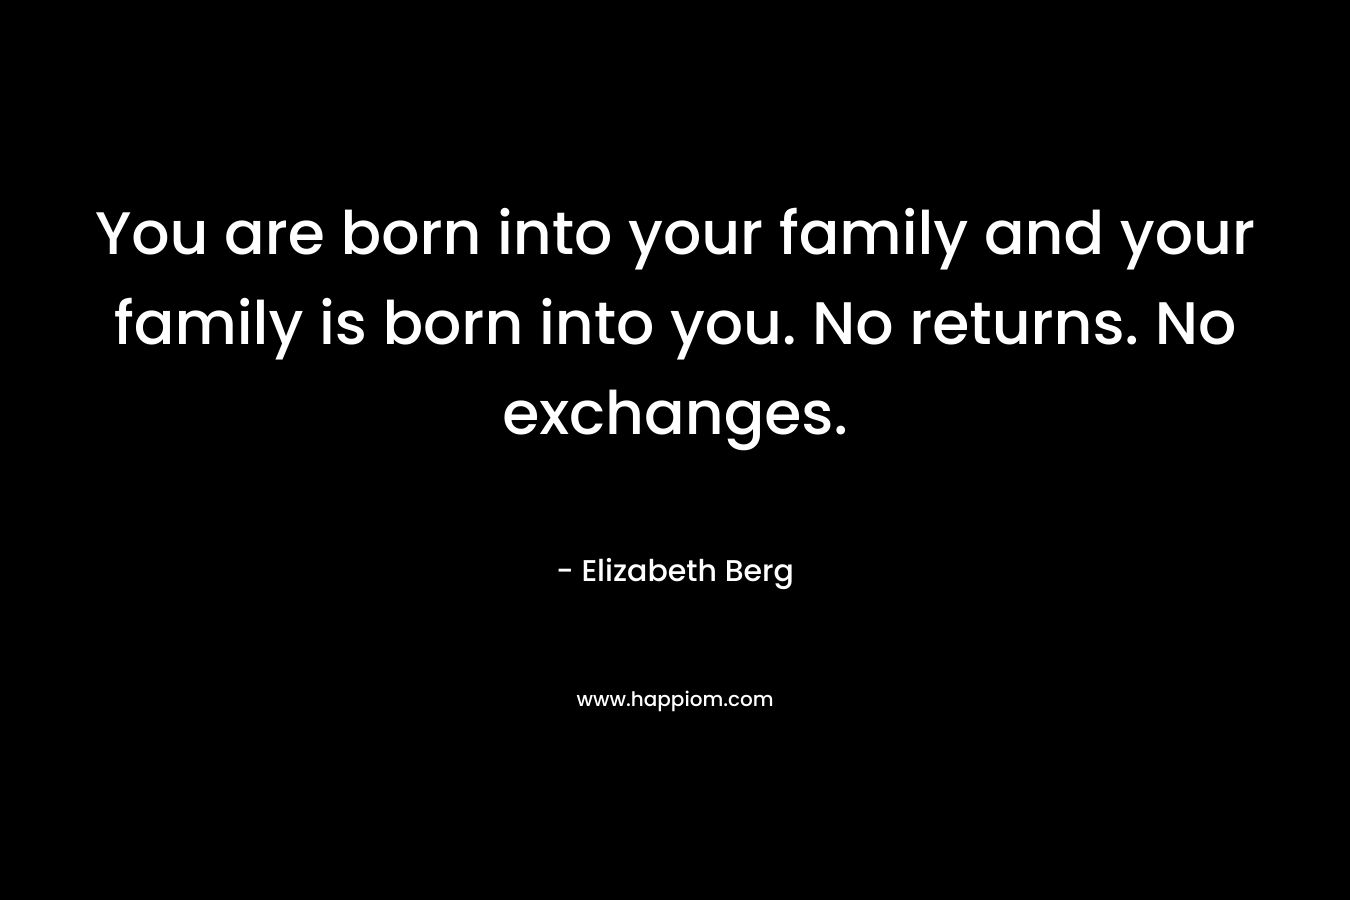 You are born into your family and your family is born into you. No returns. No exchanges. – Elizabeth Berg